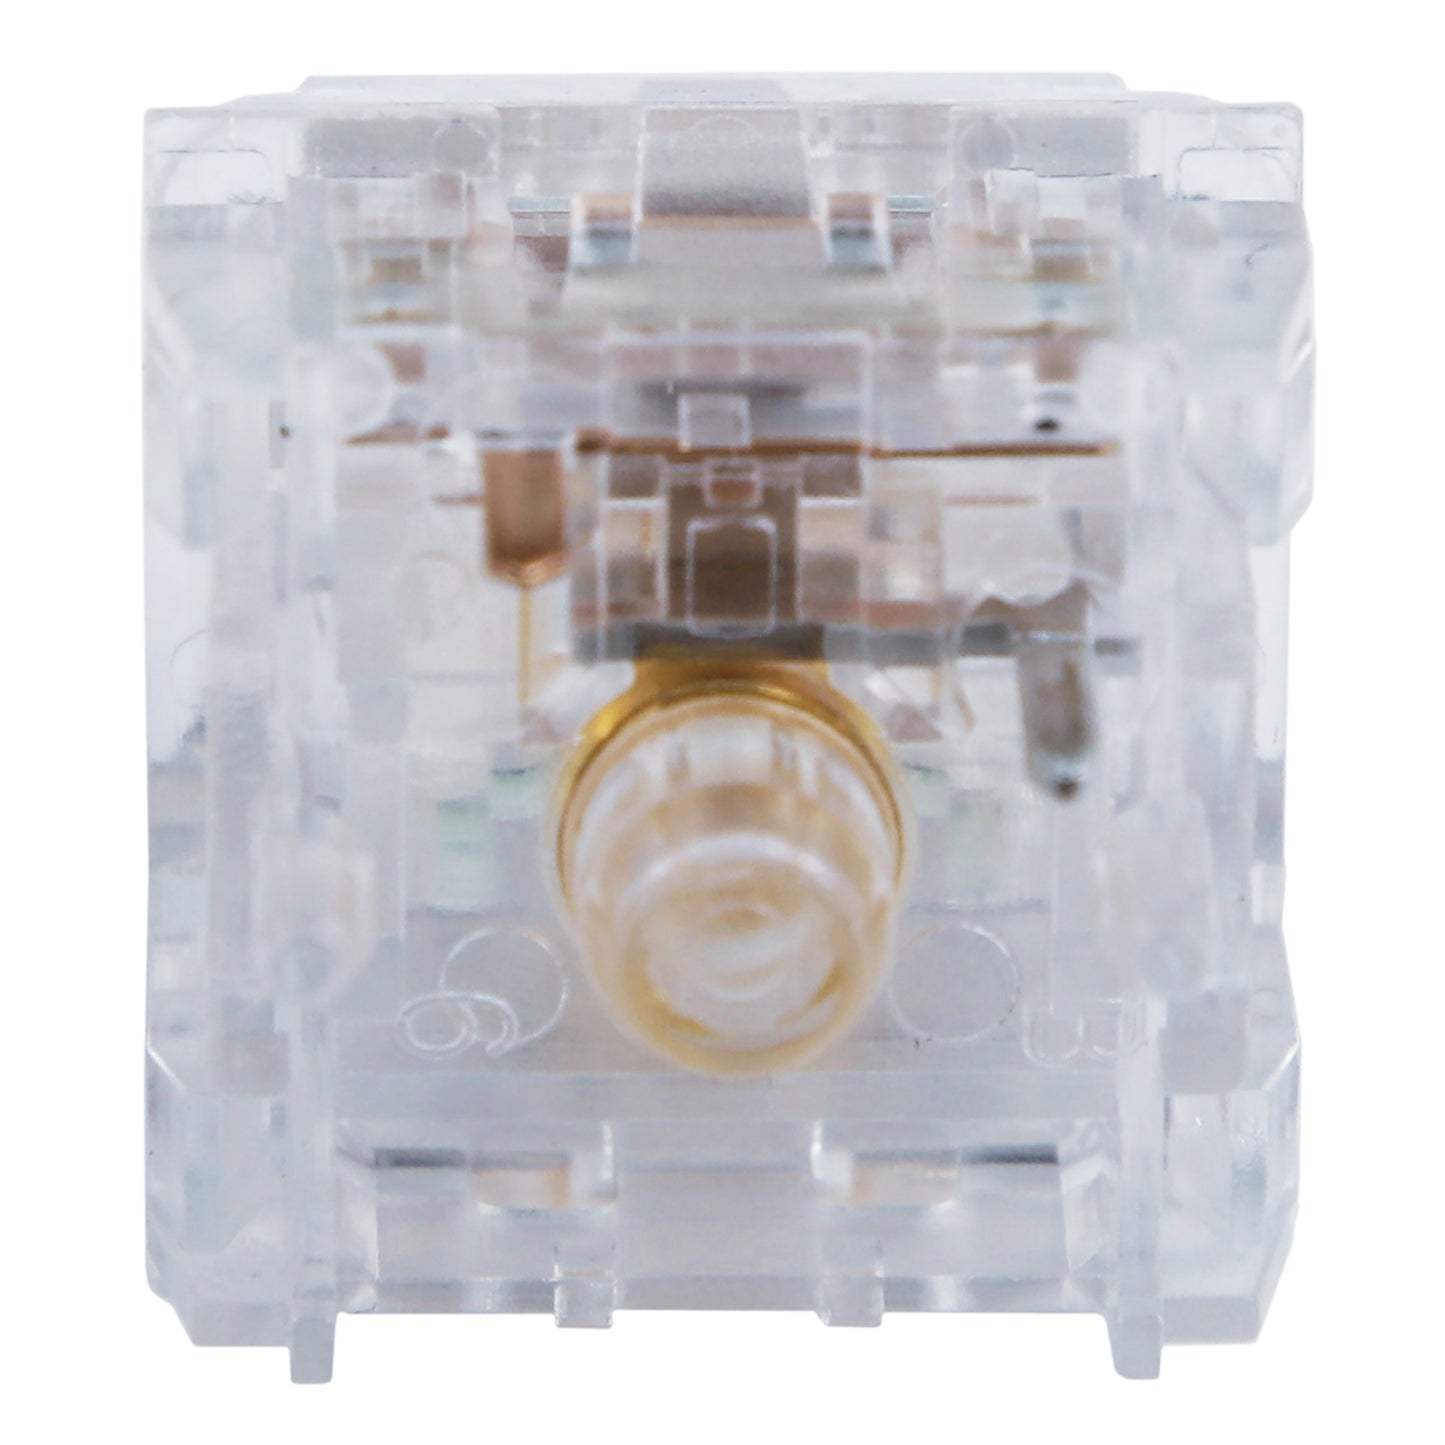 Kailh Clione Limacina Switches(Sea Angle/5 pin Tactile or Linear)